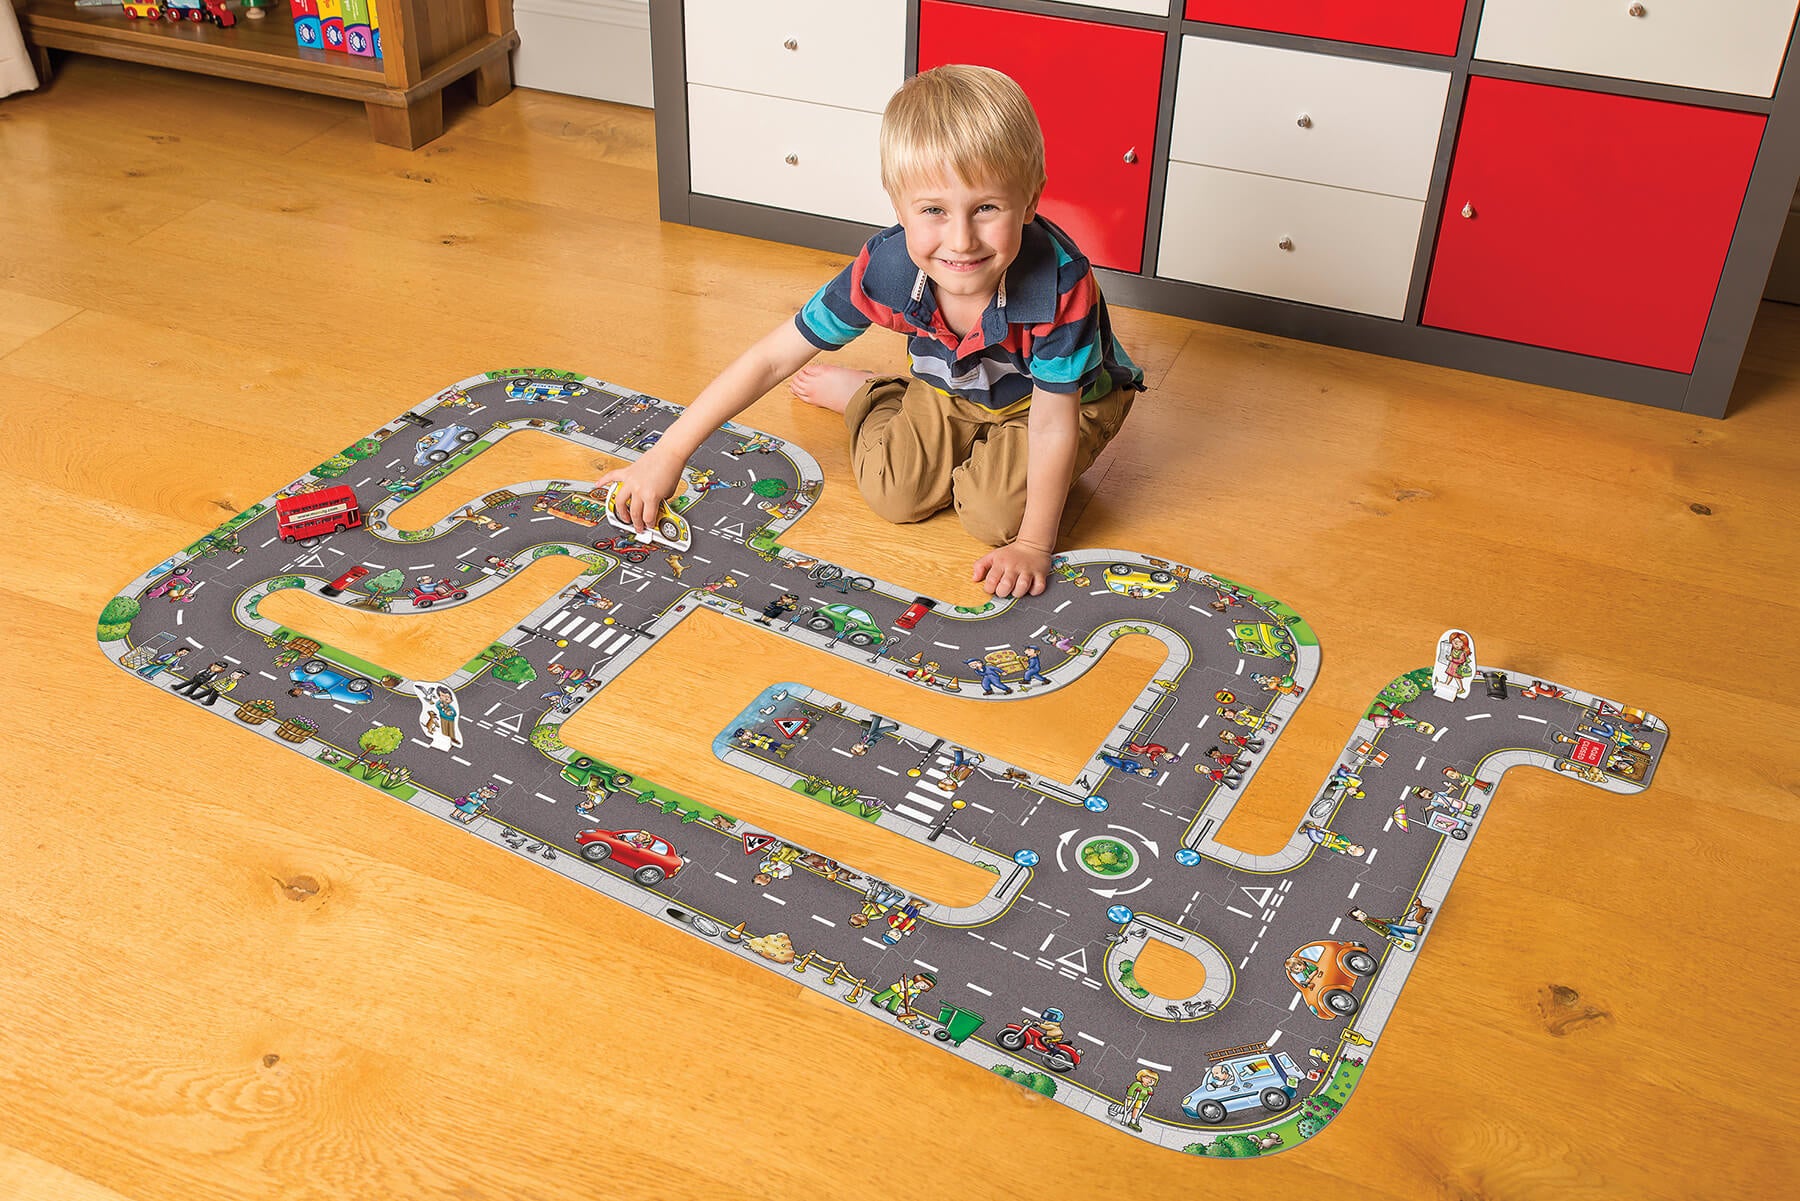 Kid with completed Giant Road Puzzle - orchard toys